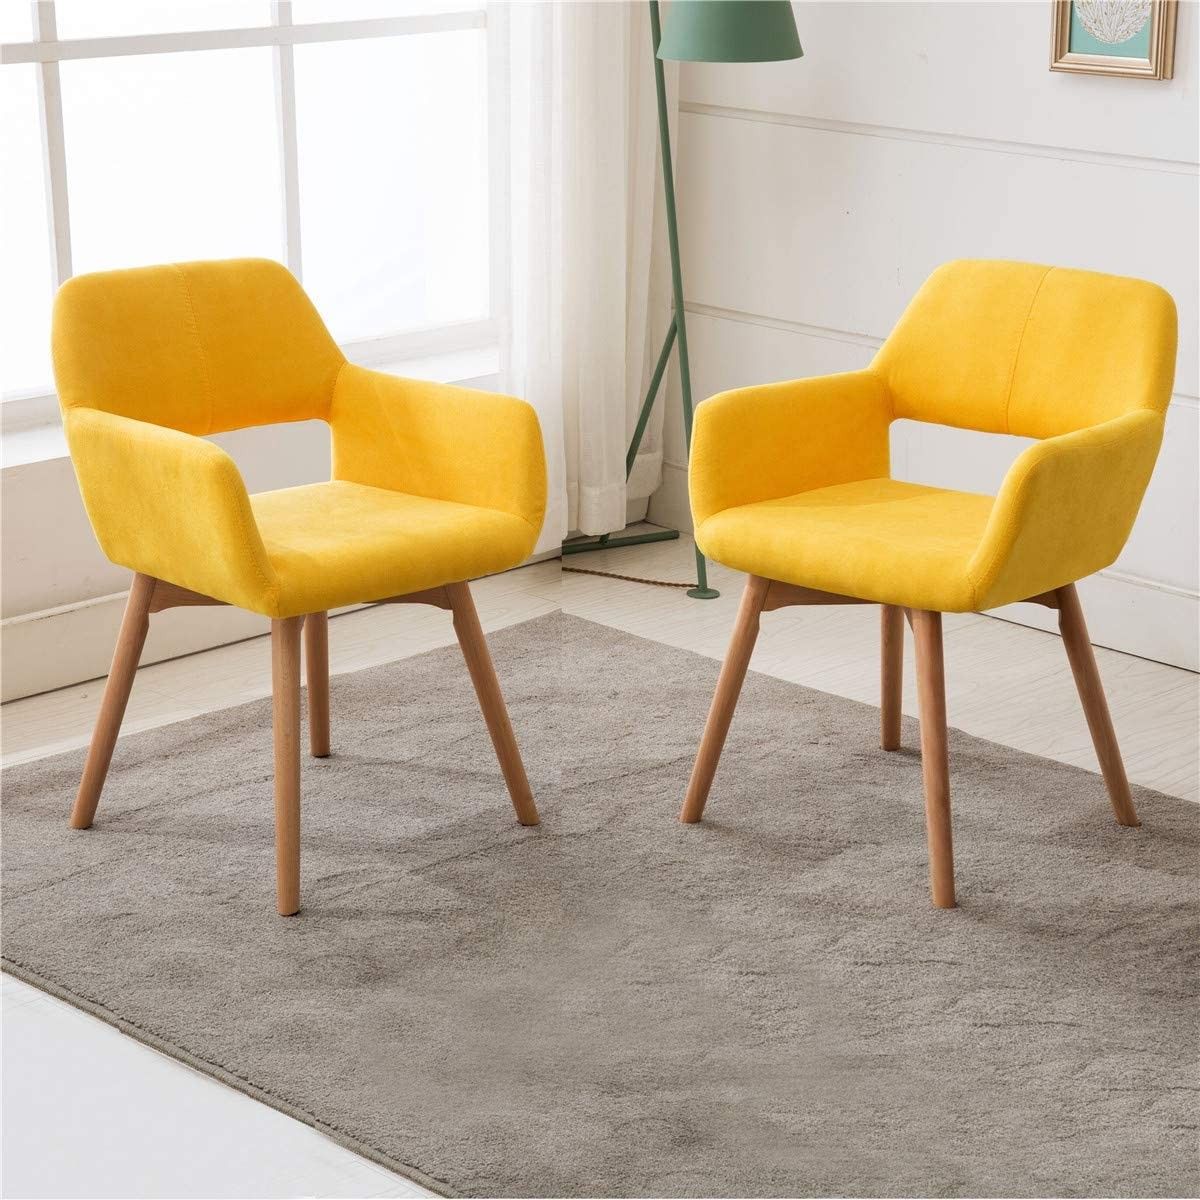 (Set of 2) Arm Chairs Curved Silhouette Solid Wood Legs w/ Soft Foam (Yellow)